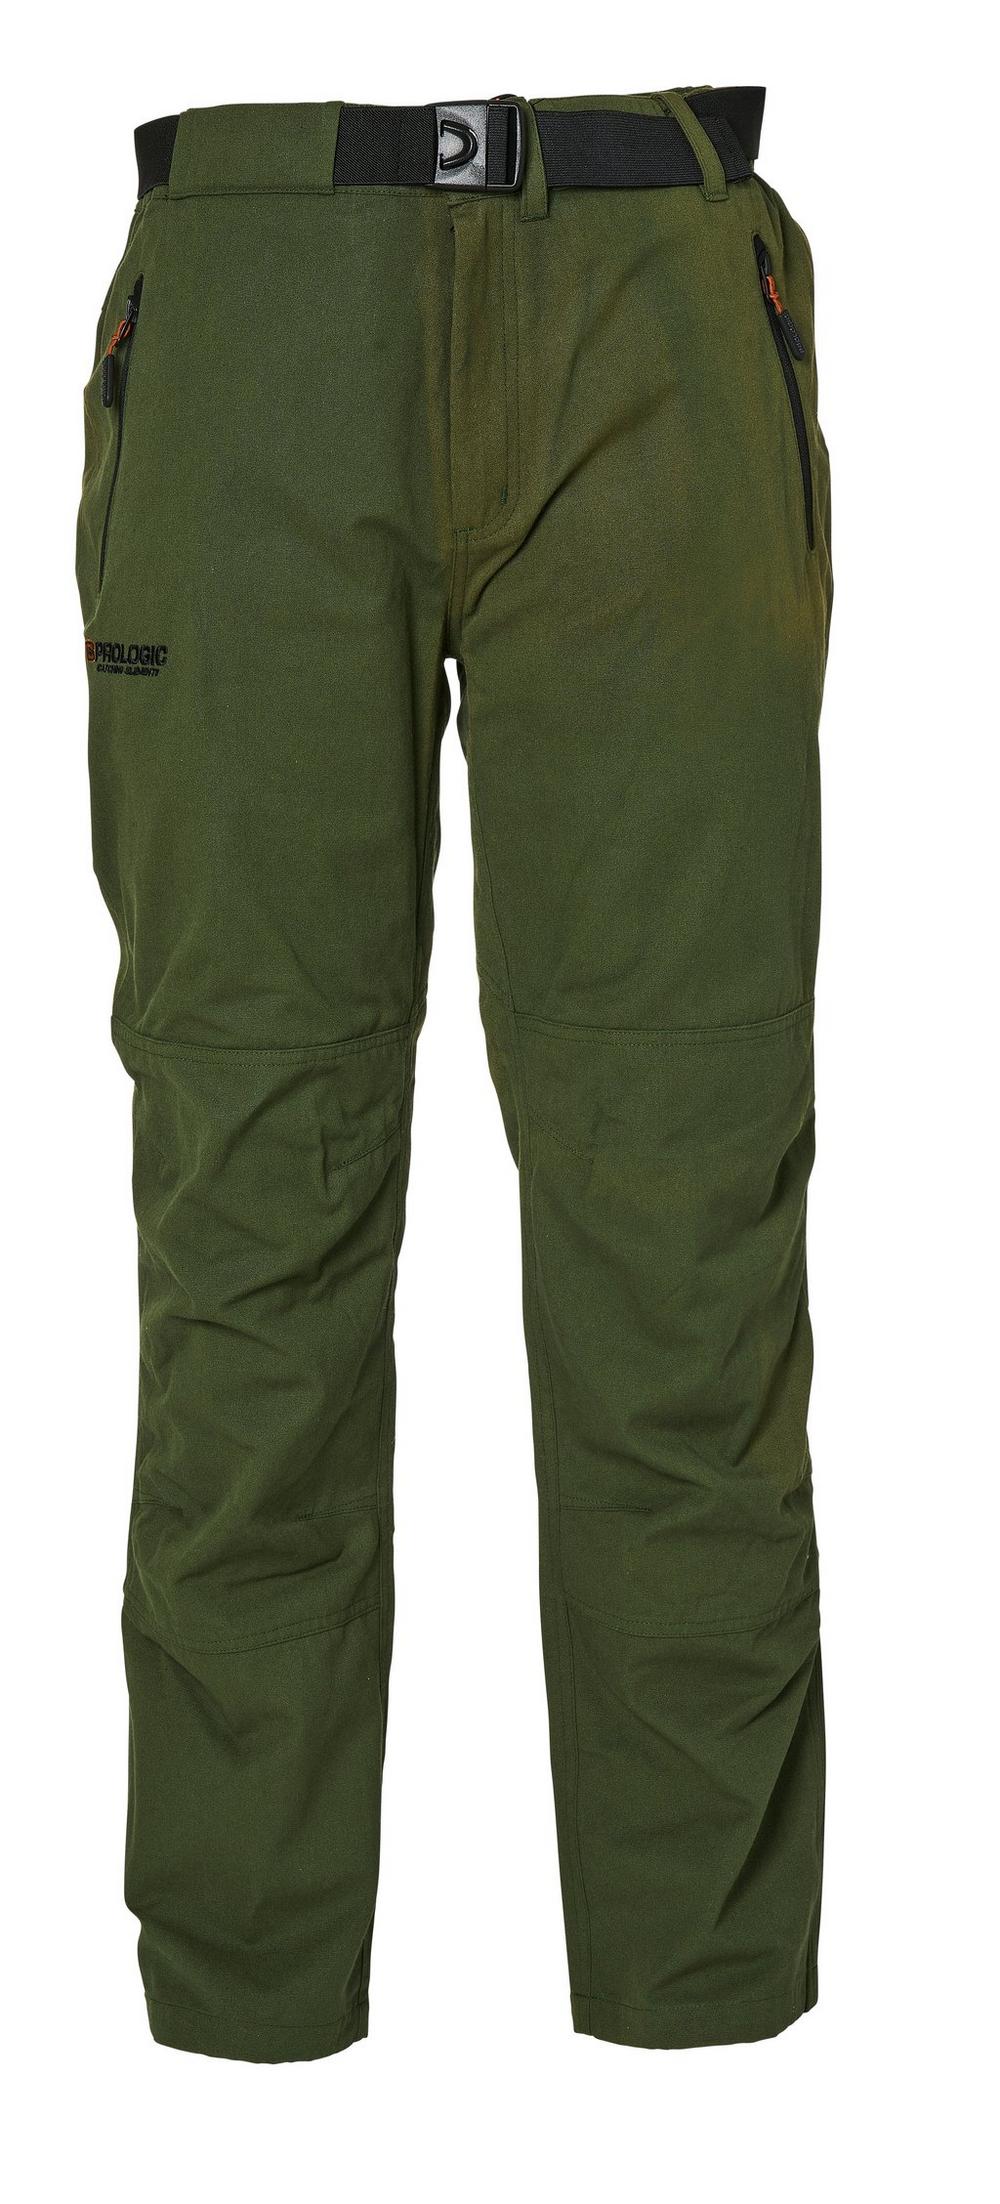 Prologic Combat Trousers Army Green